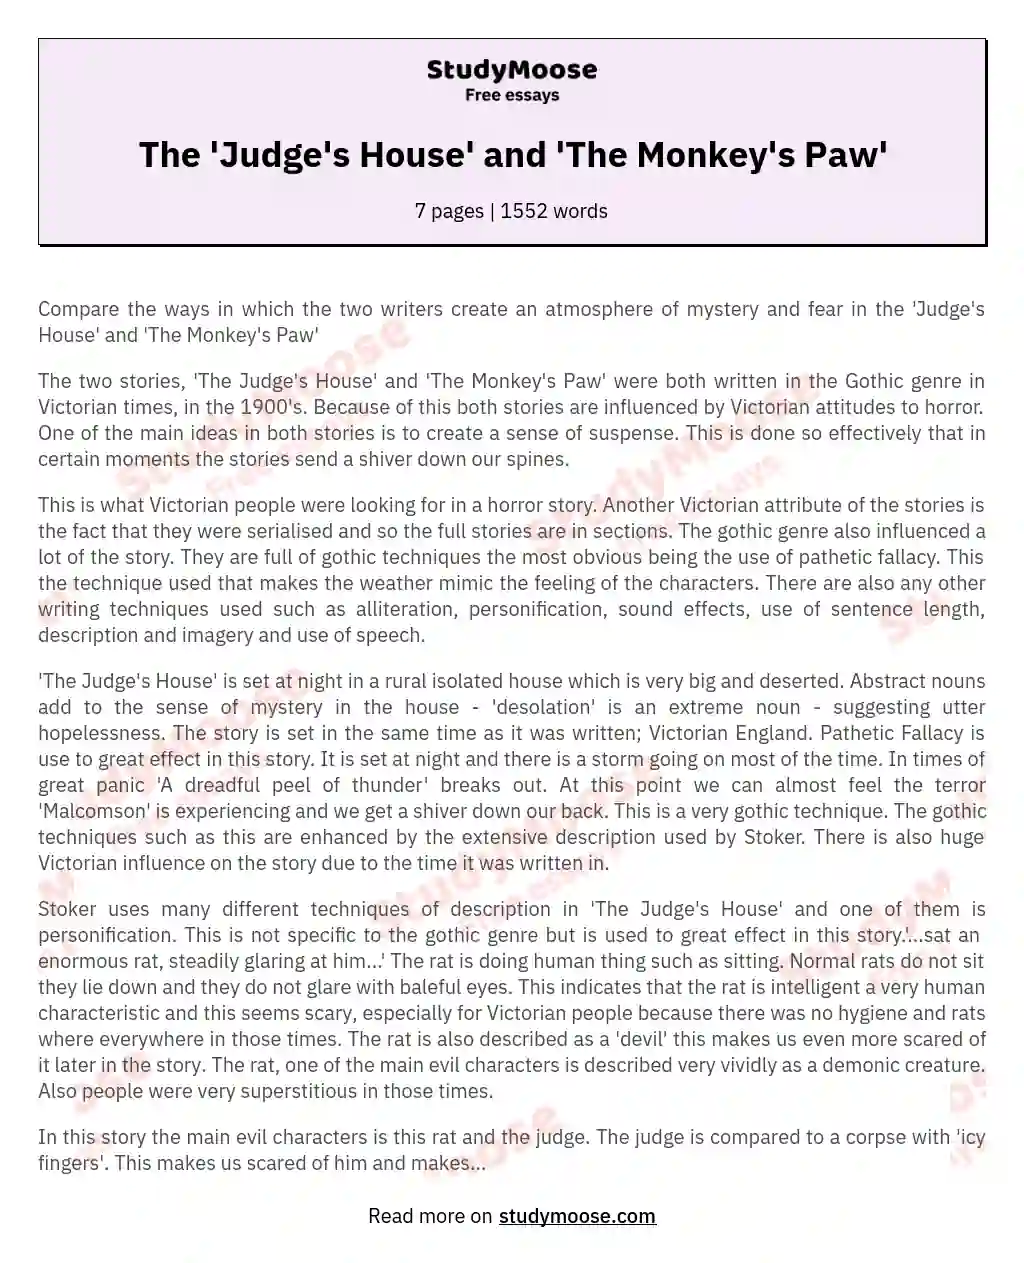 The 'Judge's House' and 'The Monkey's Paw'